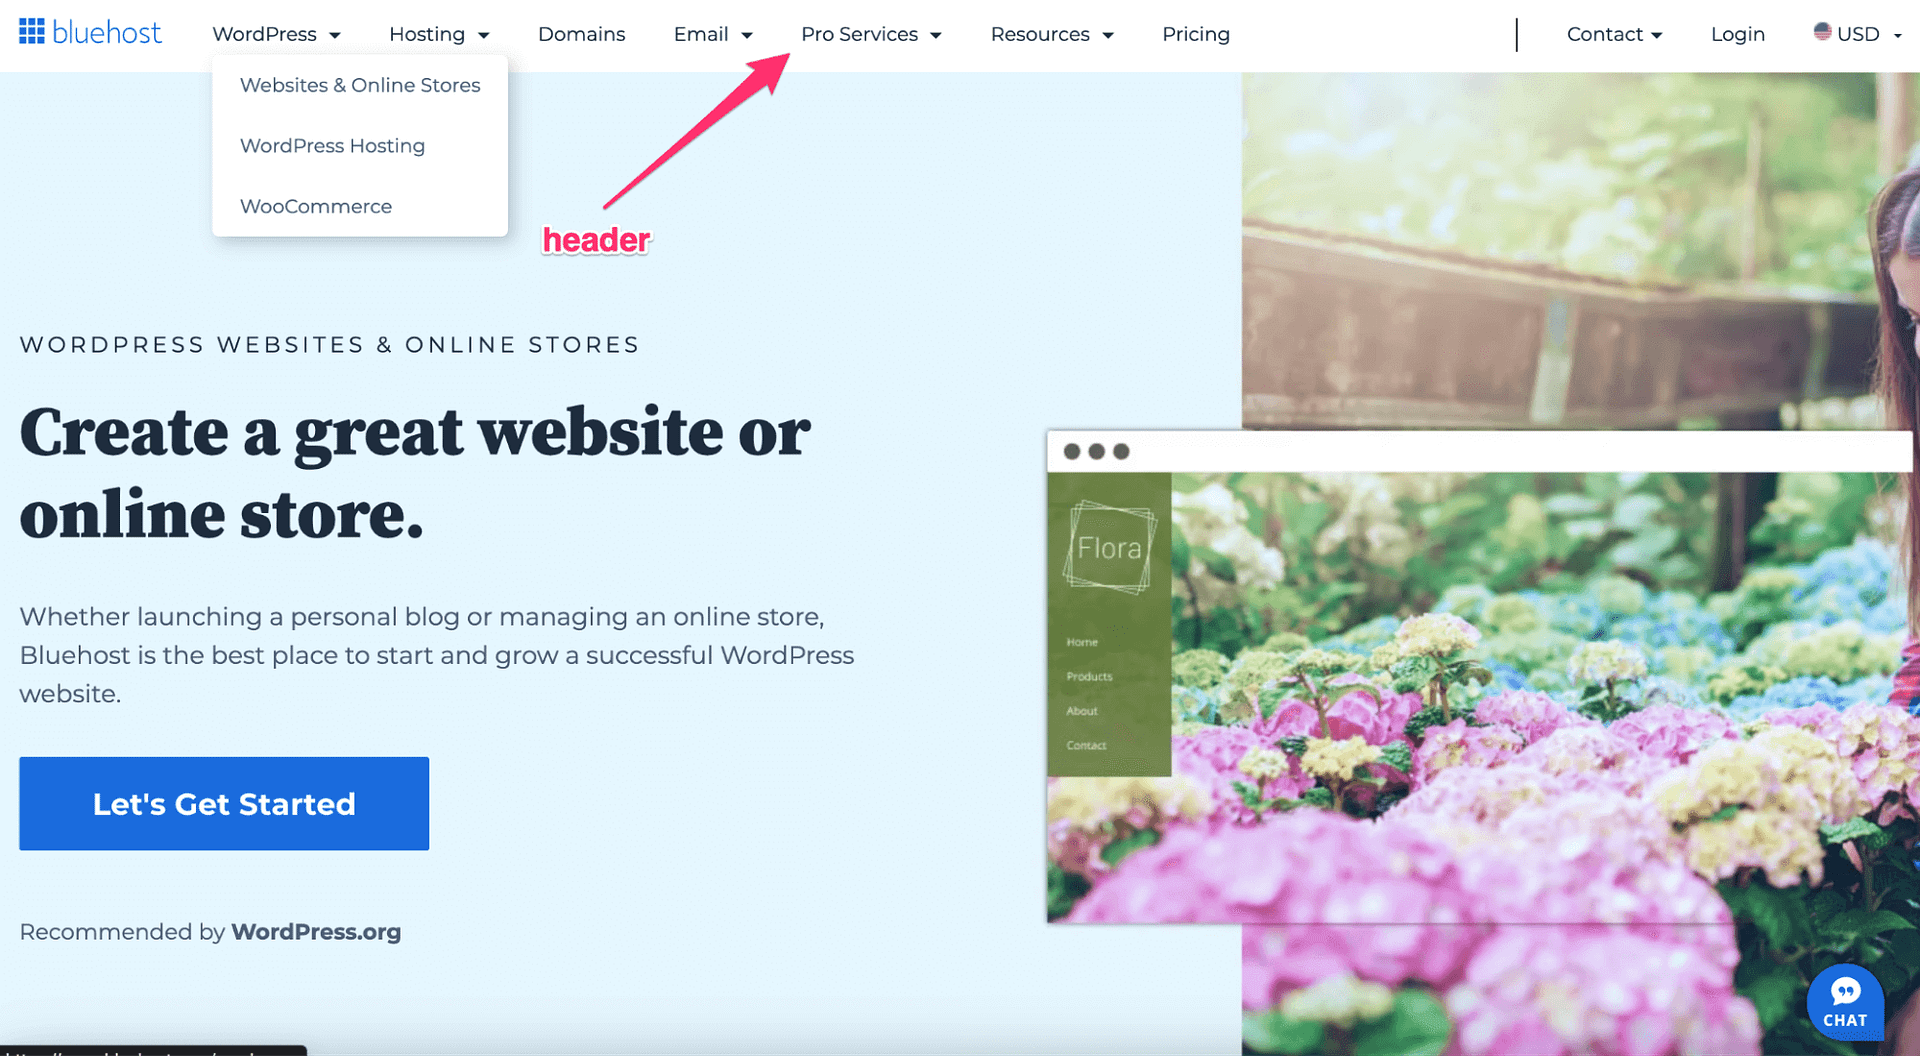 A header is a common web design element.